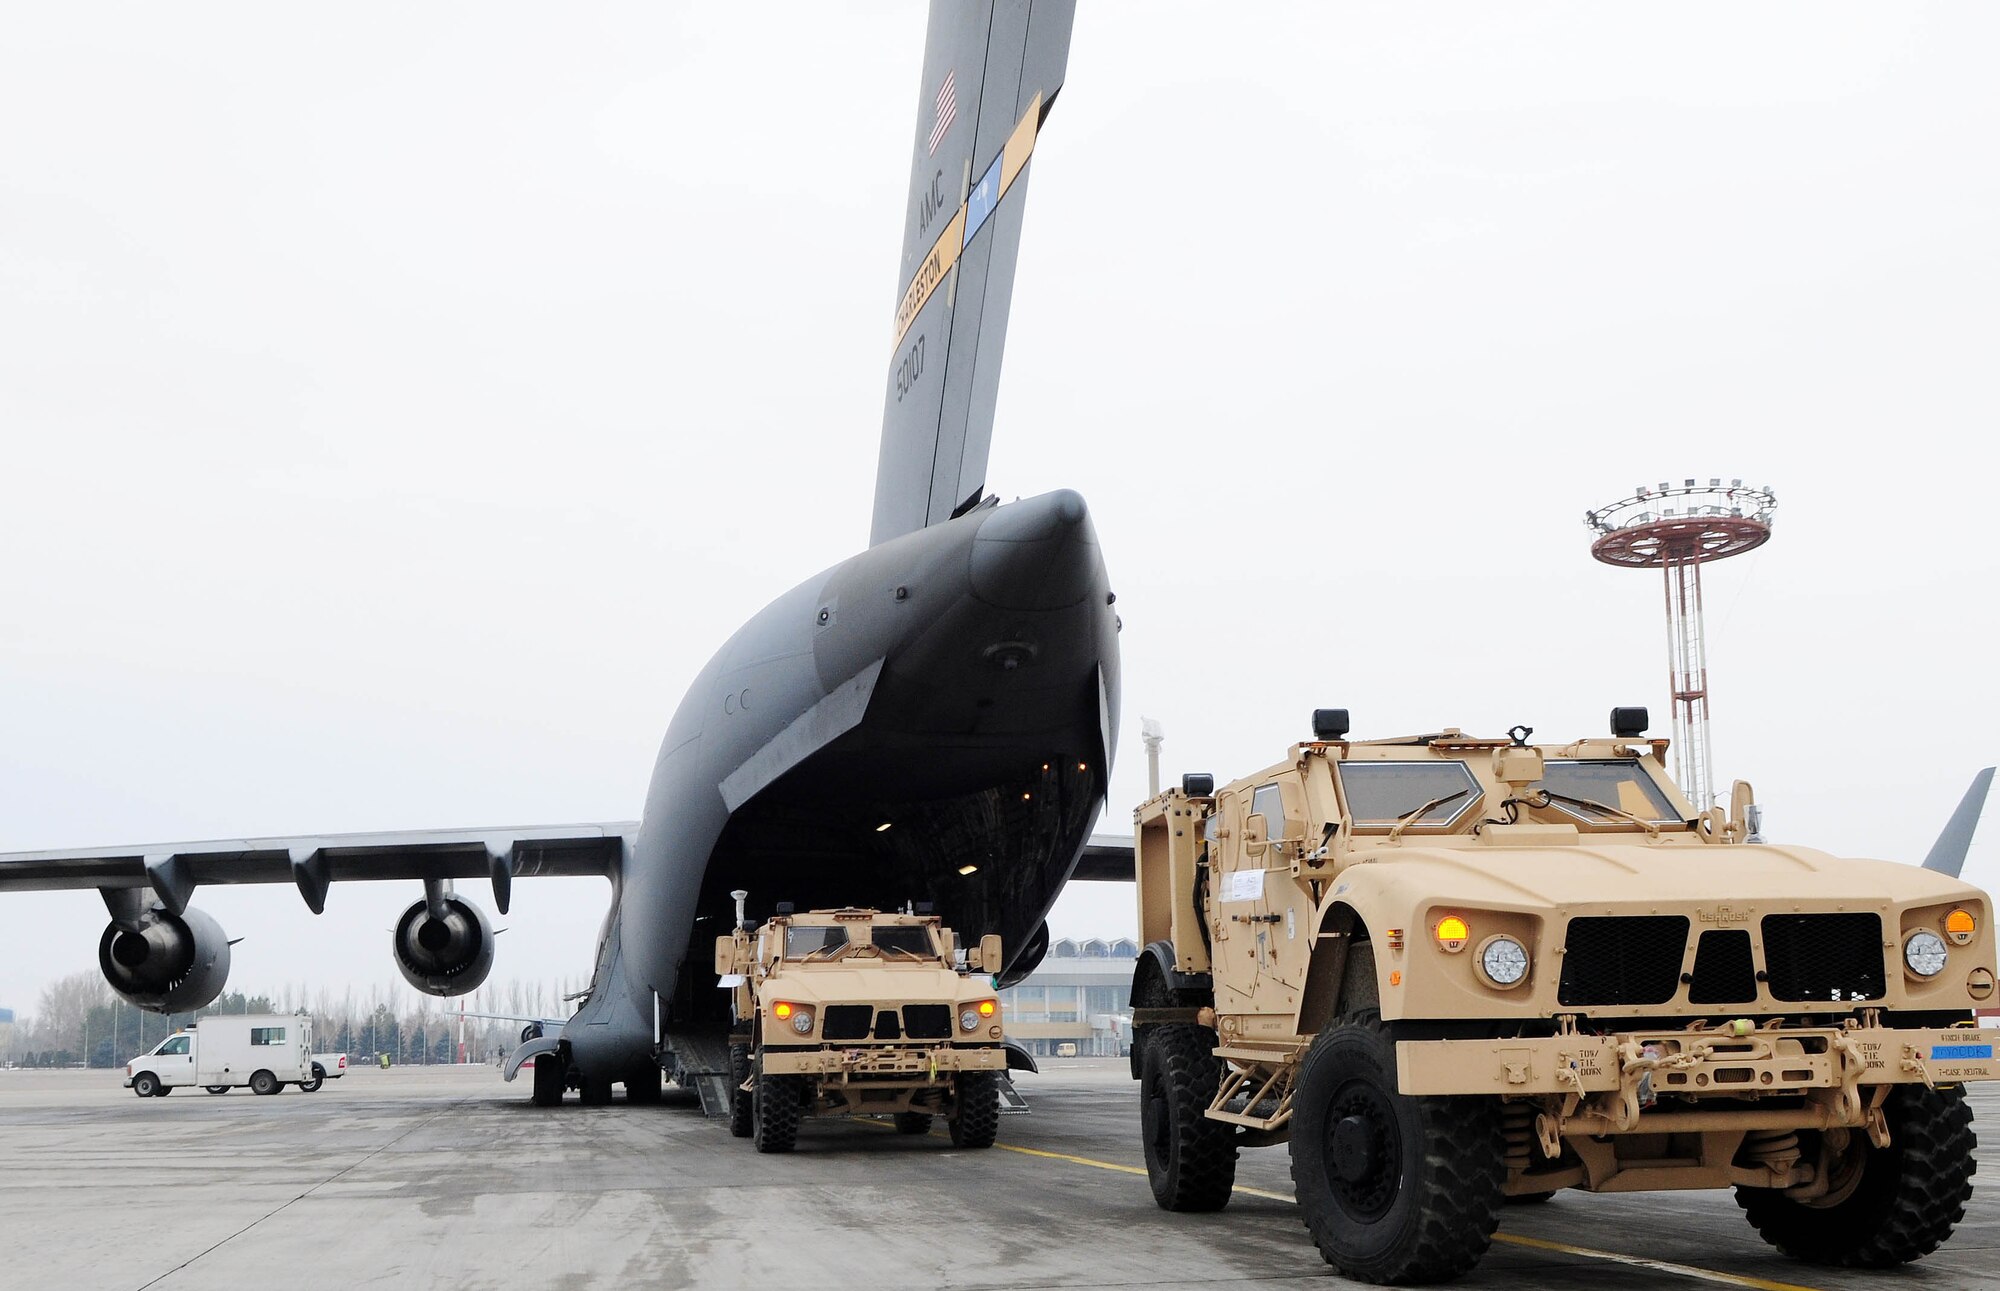 TRANSIT CENTER AT MANAS, Kyrgyzstan - Several MRAP-all terrain vehicles are loaded into a C-17 Globemaster III prior to shipment to Afghanistan. Several C-17s provide airlift for military servicemembers and cargo. (U.S. Air Force photo by Senior Airman Nichelle Anderson)